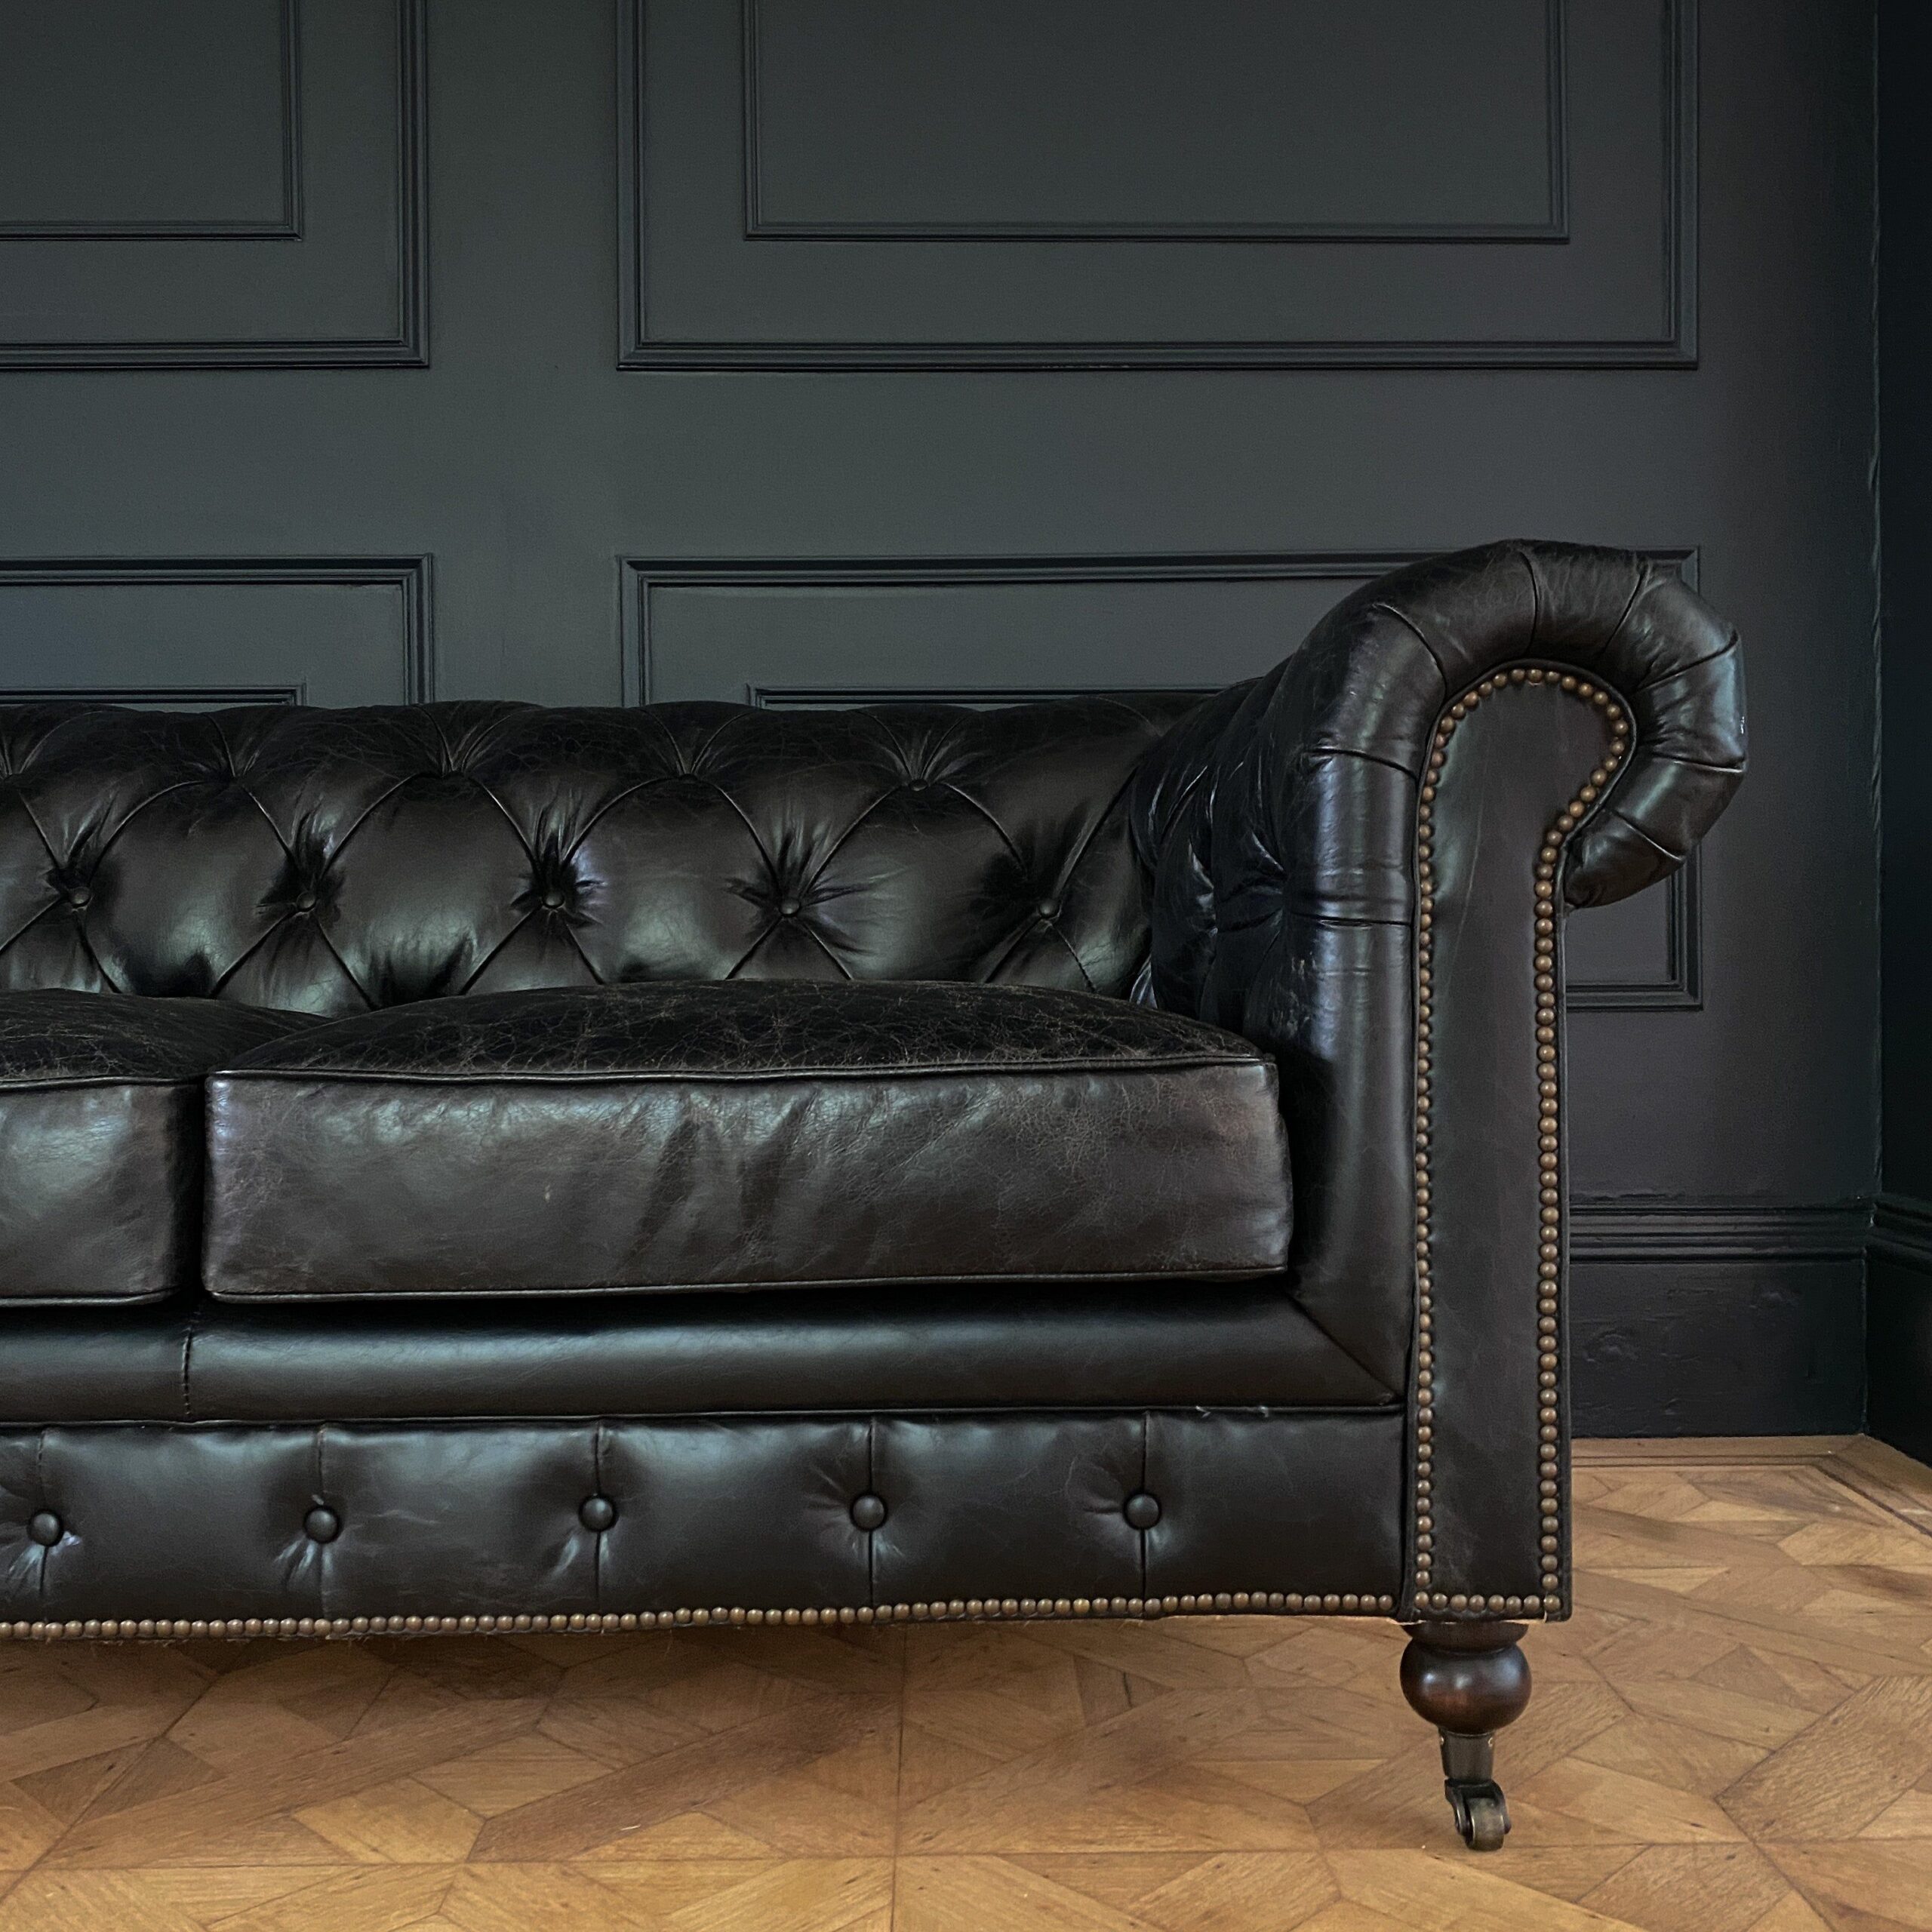 Comfort and Style: The Timeless Elegance of a Black Leather Chesterfield Sofa